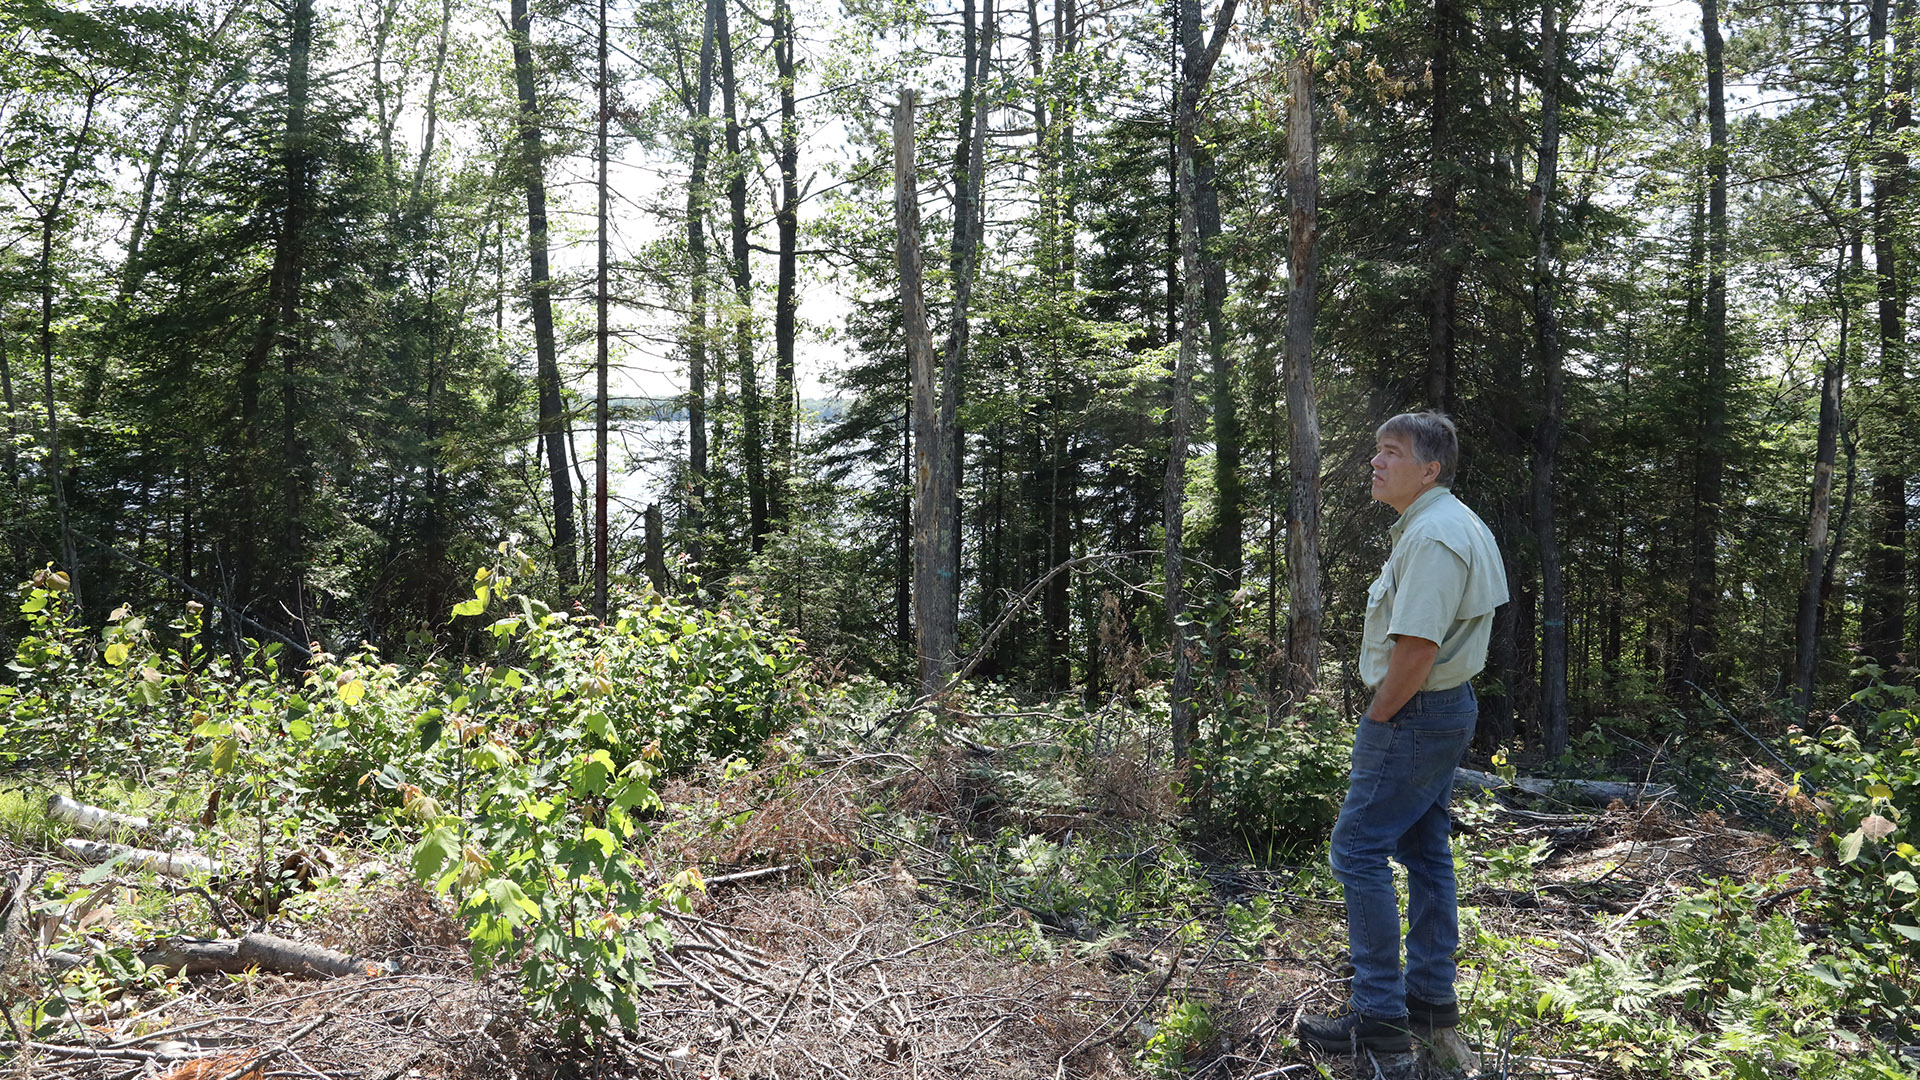 John Schwarzman stands among logging slash with trees standing in the background and the surface of a lake in the far background.